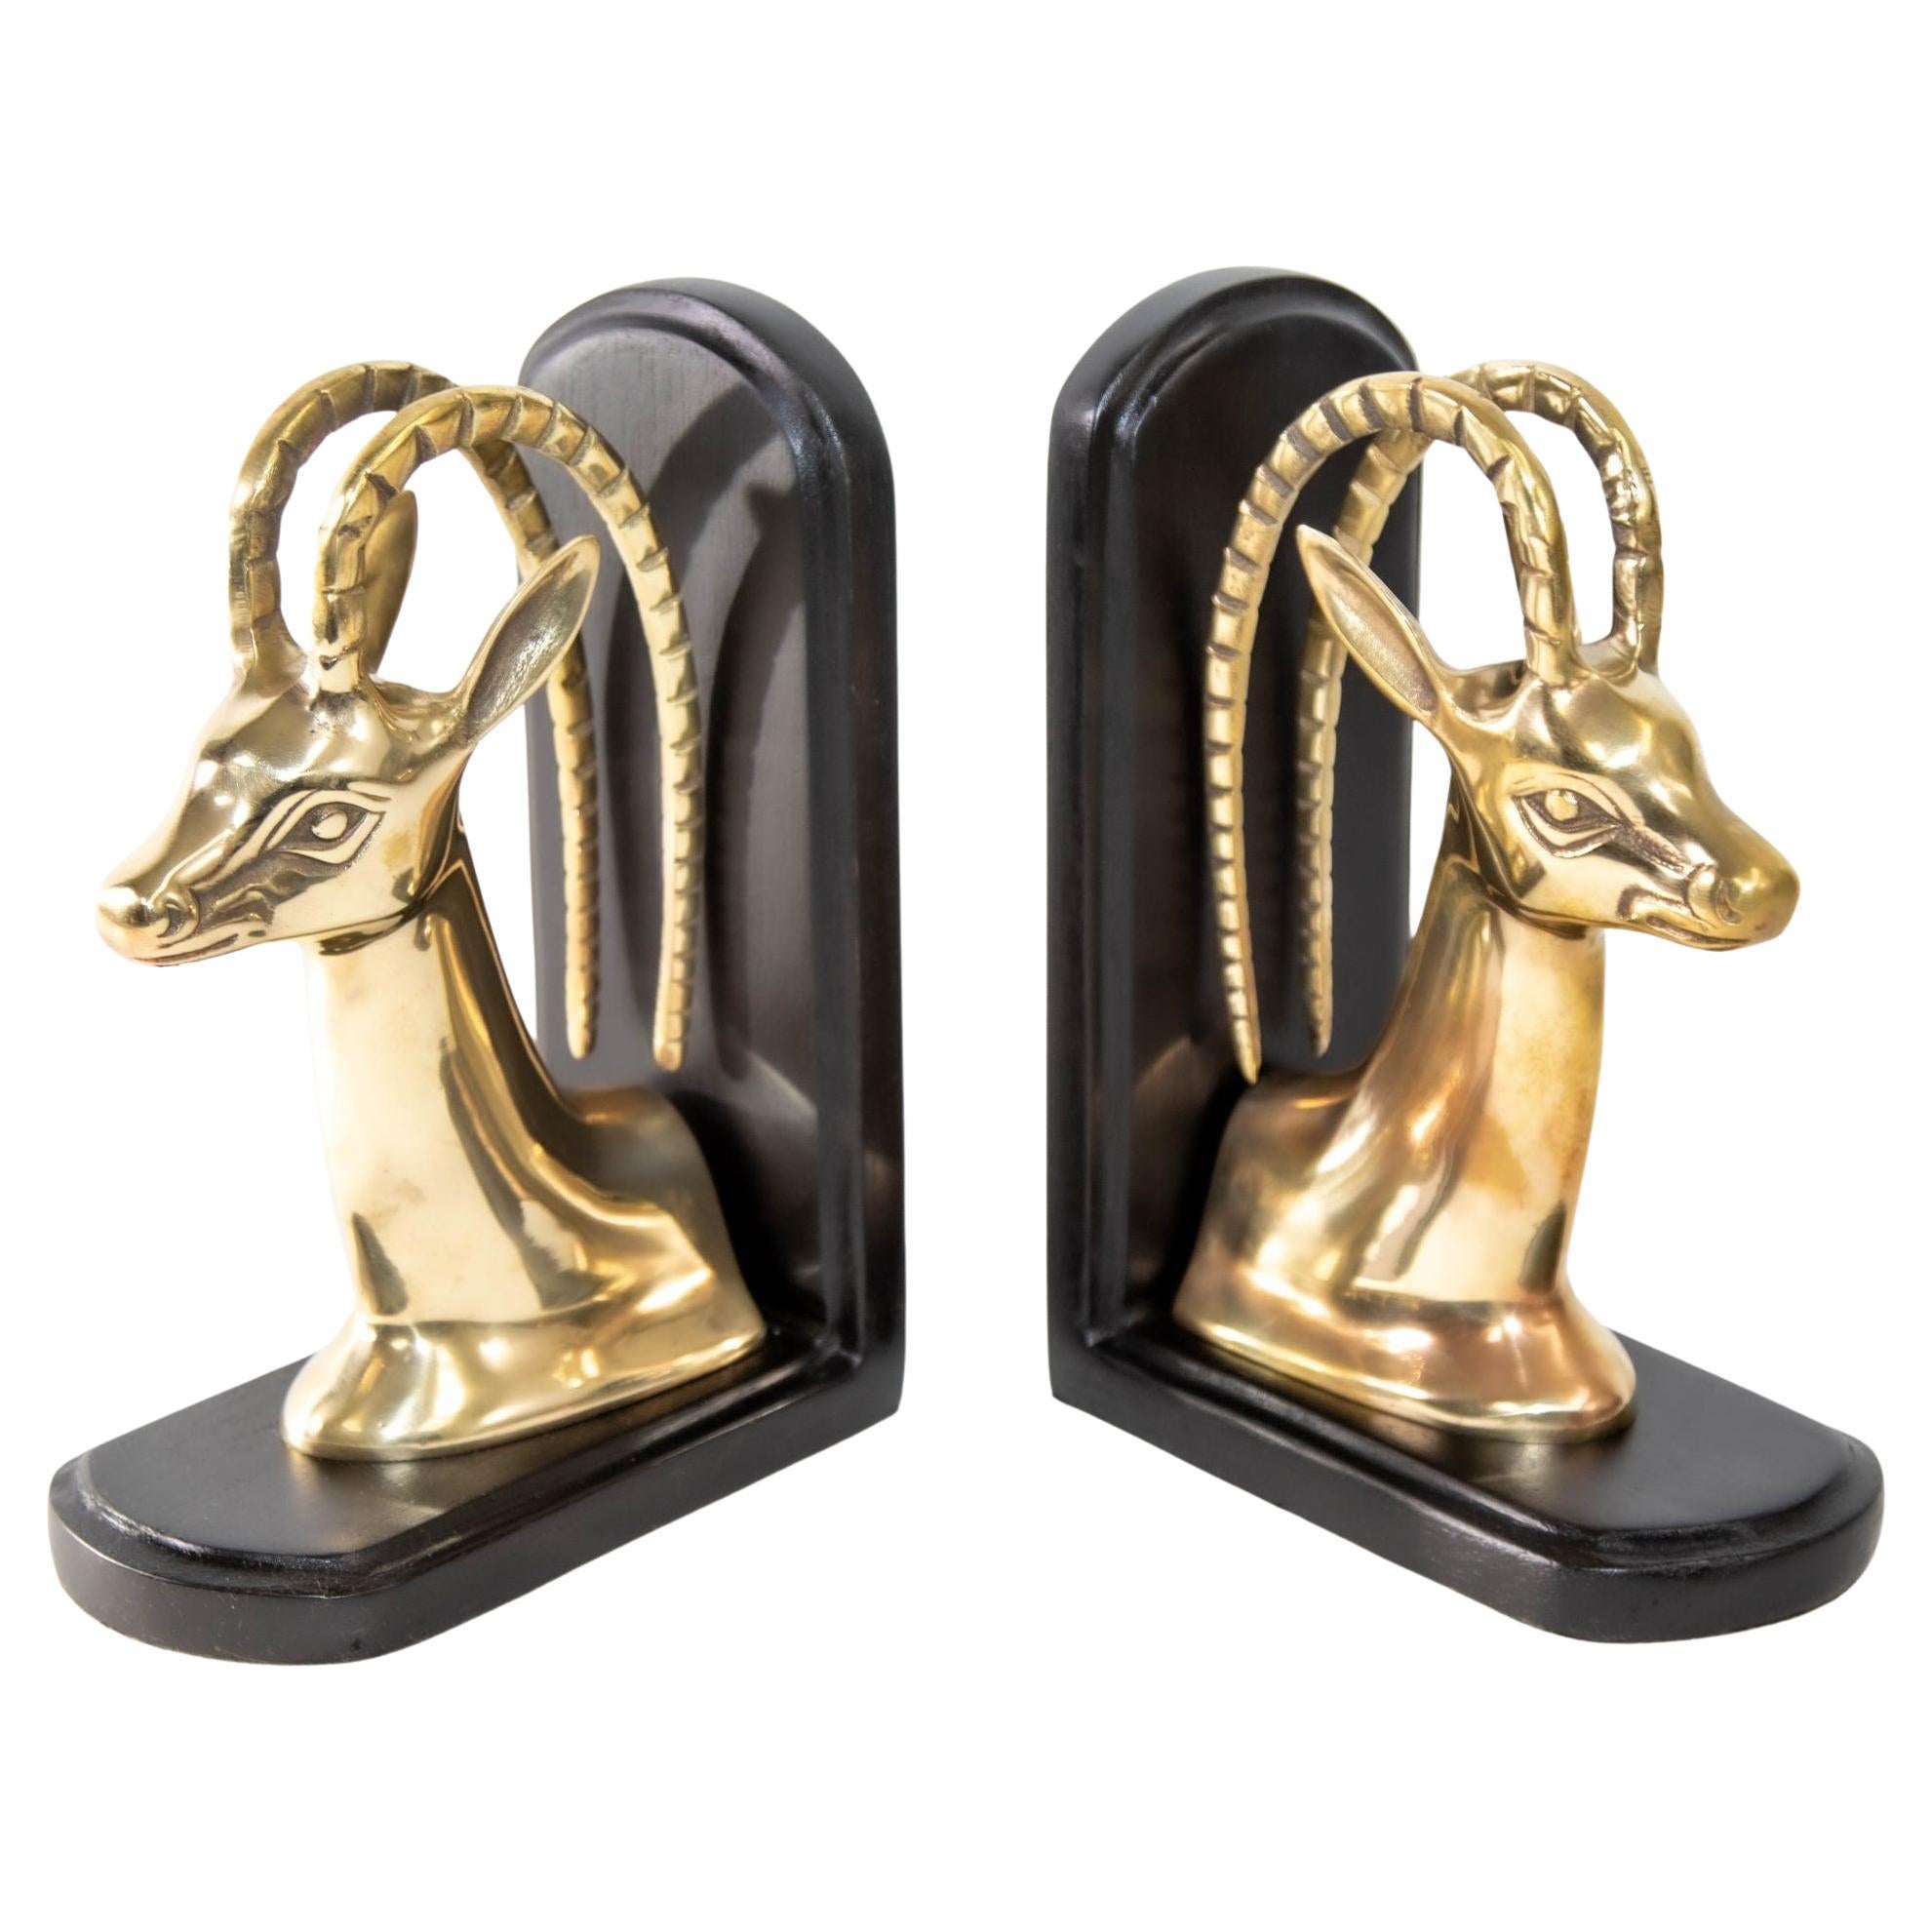 1950s Pair Art Deco Revival Polished Brass Gazelle Antelope Mount Bookends For Sale